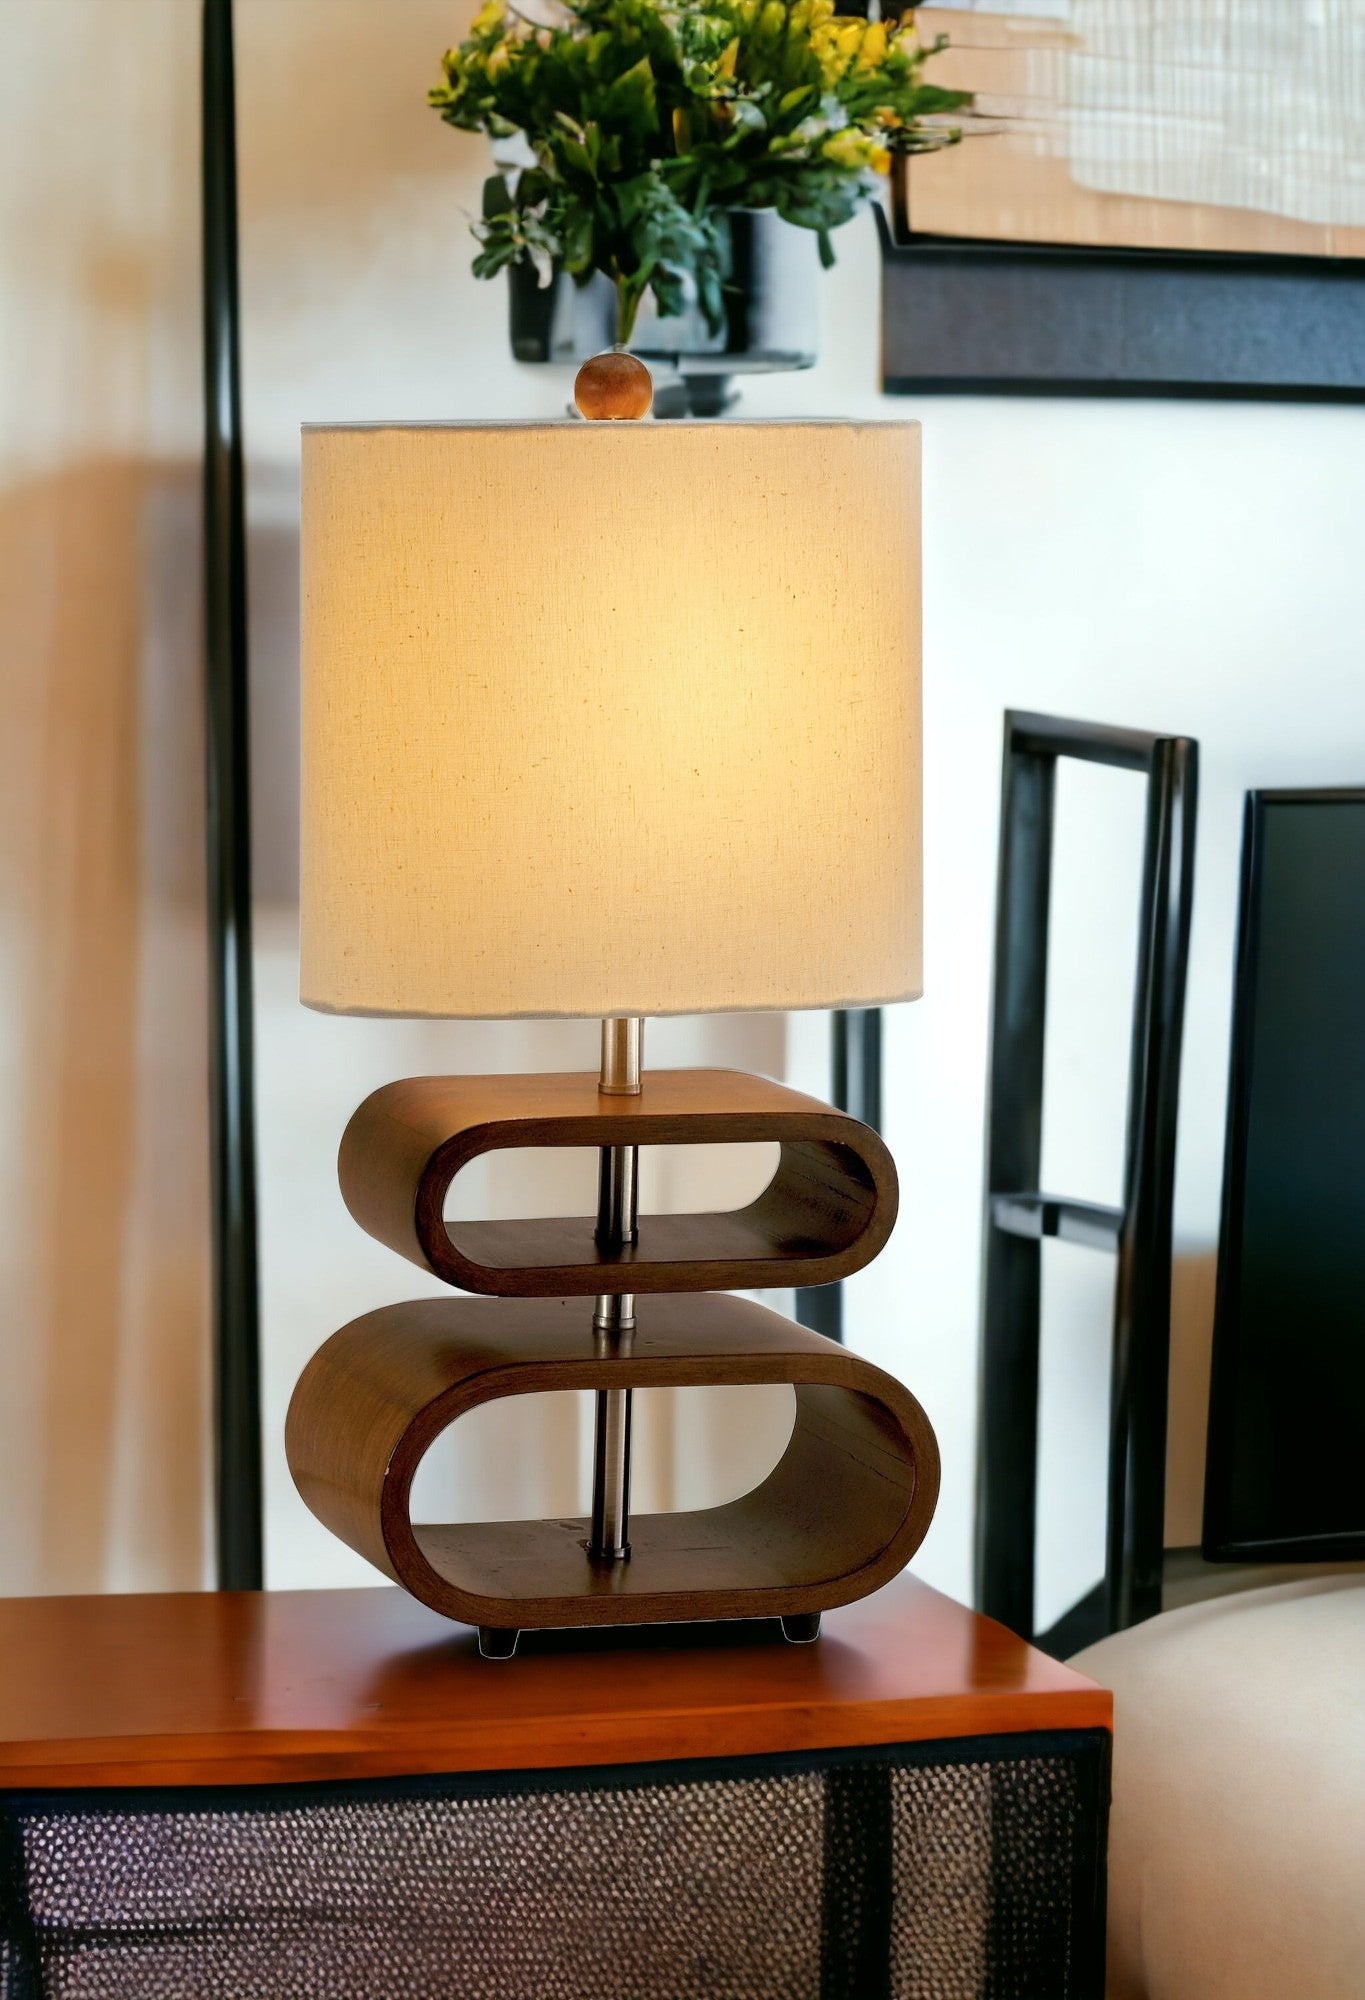 19" Brown Retro Ovals Wood Bedside Lamp With Natural Shade